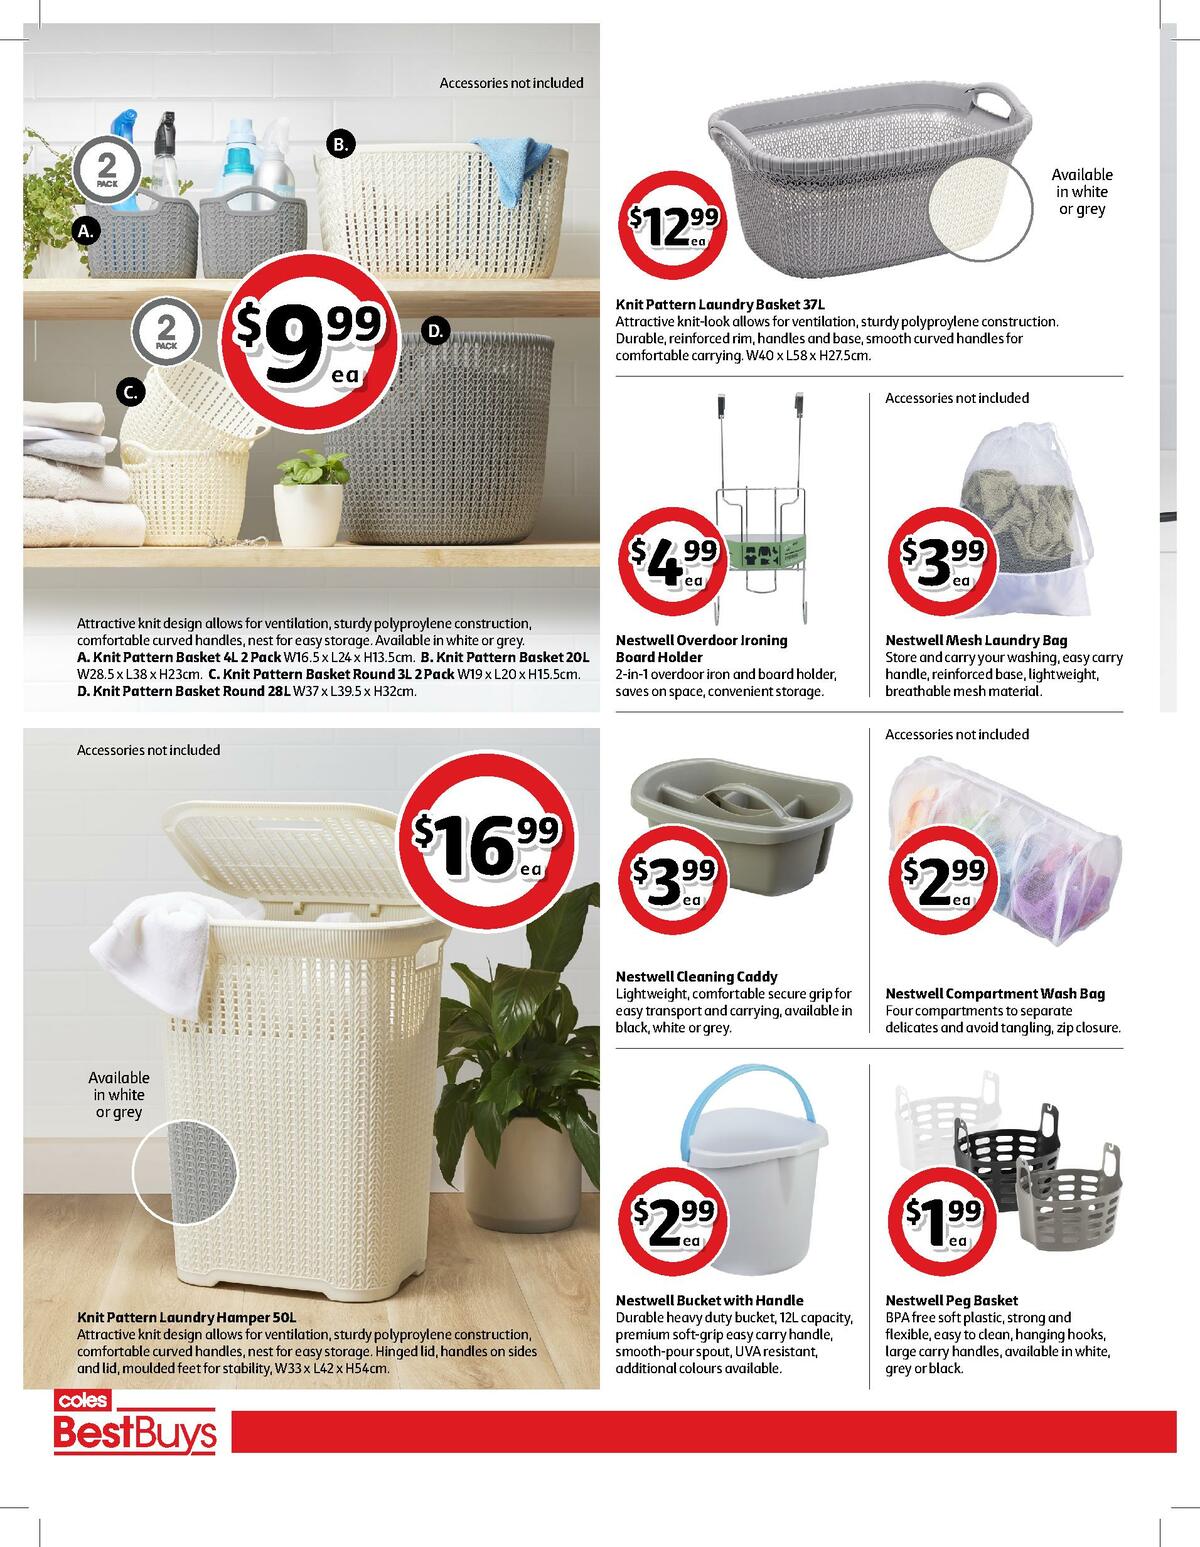 Coles Best Buys - Laundry & Storage sneak peek Catalogues from 18 June